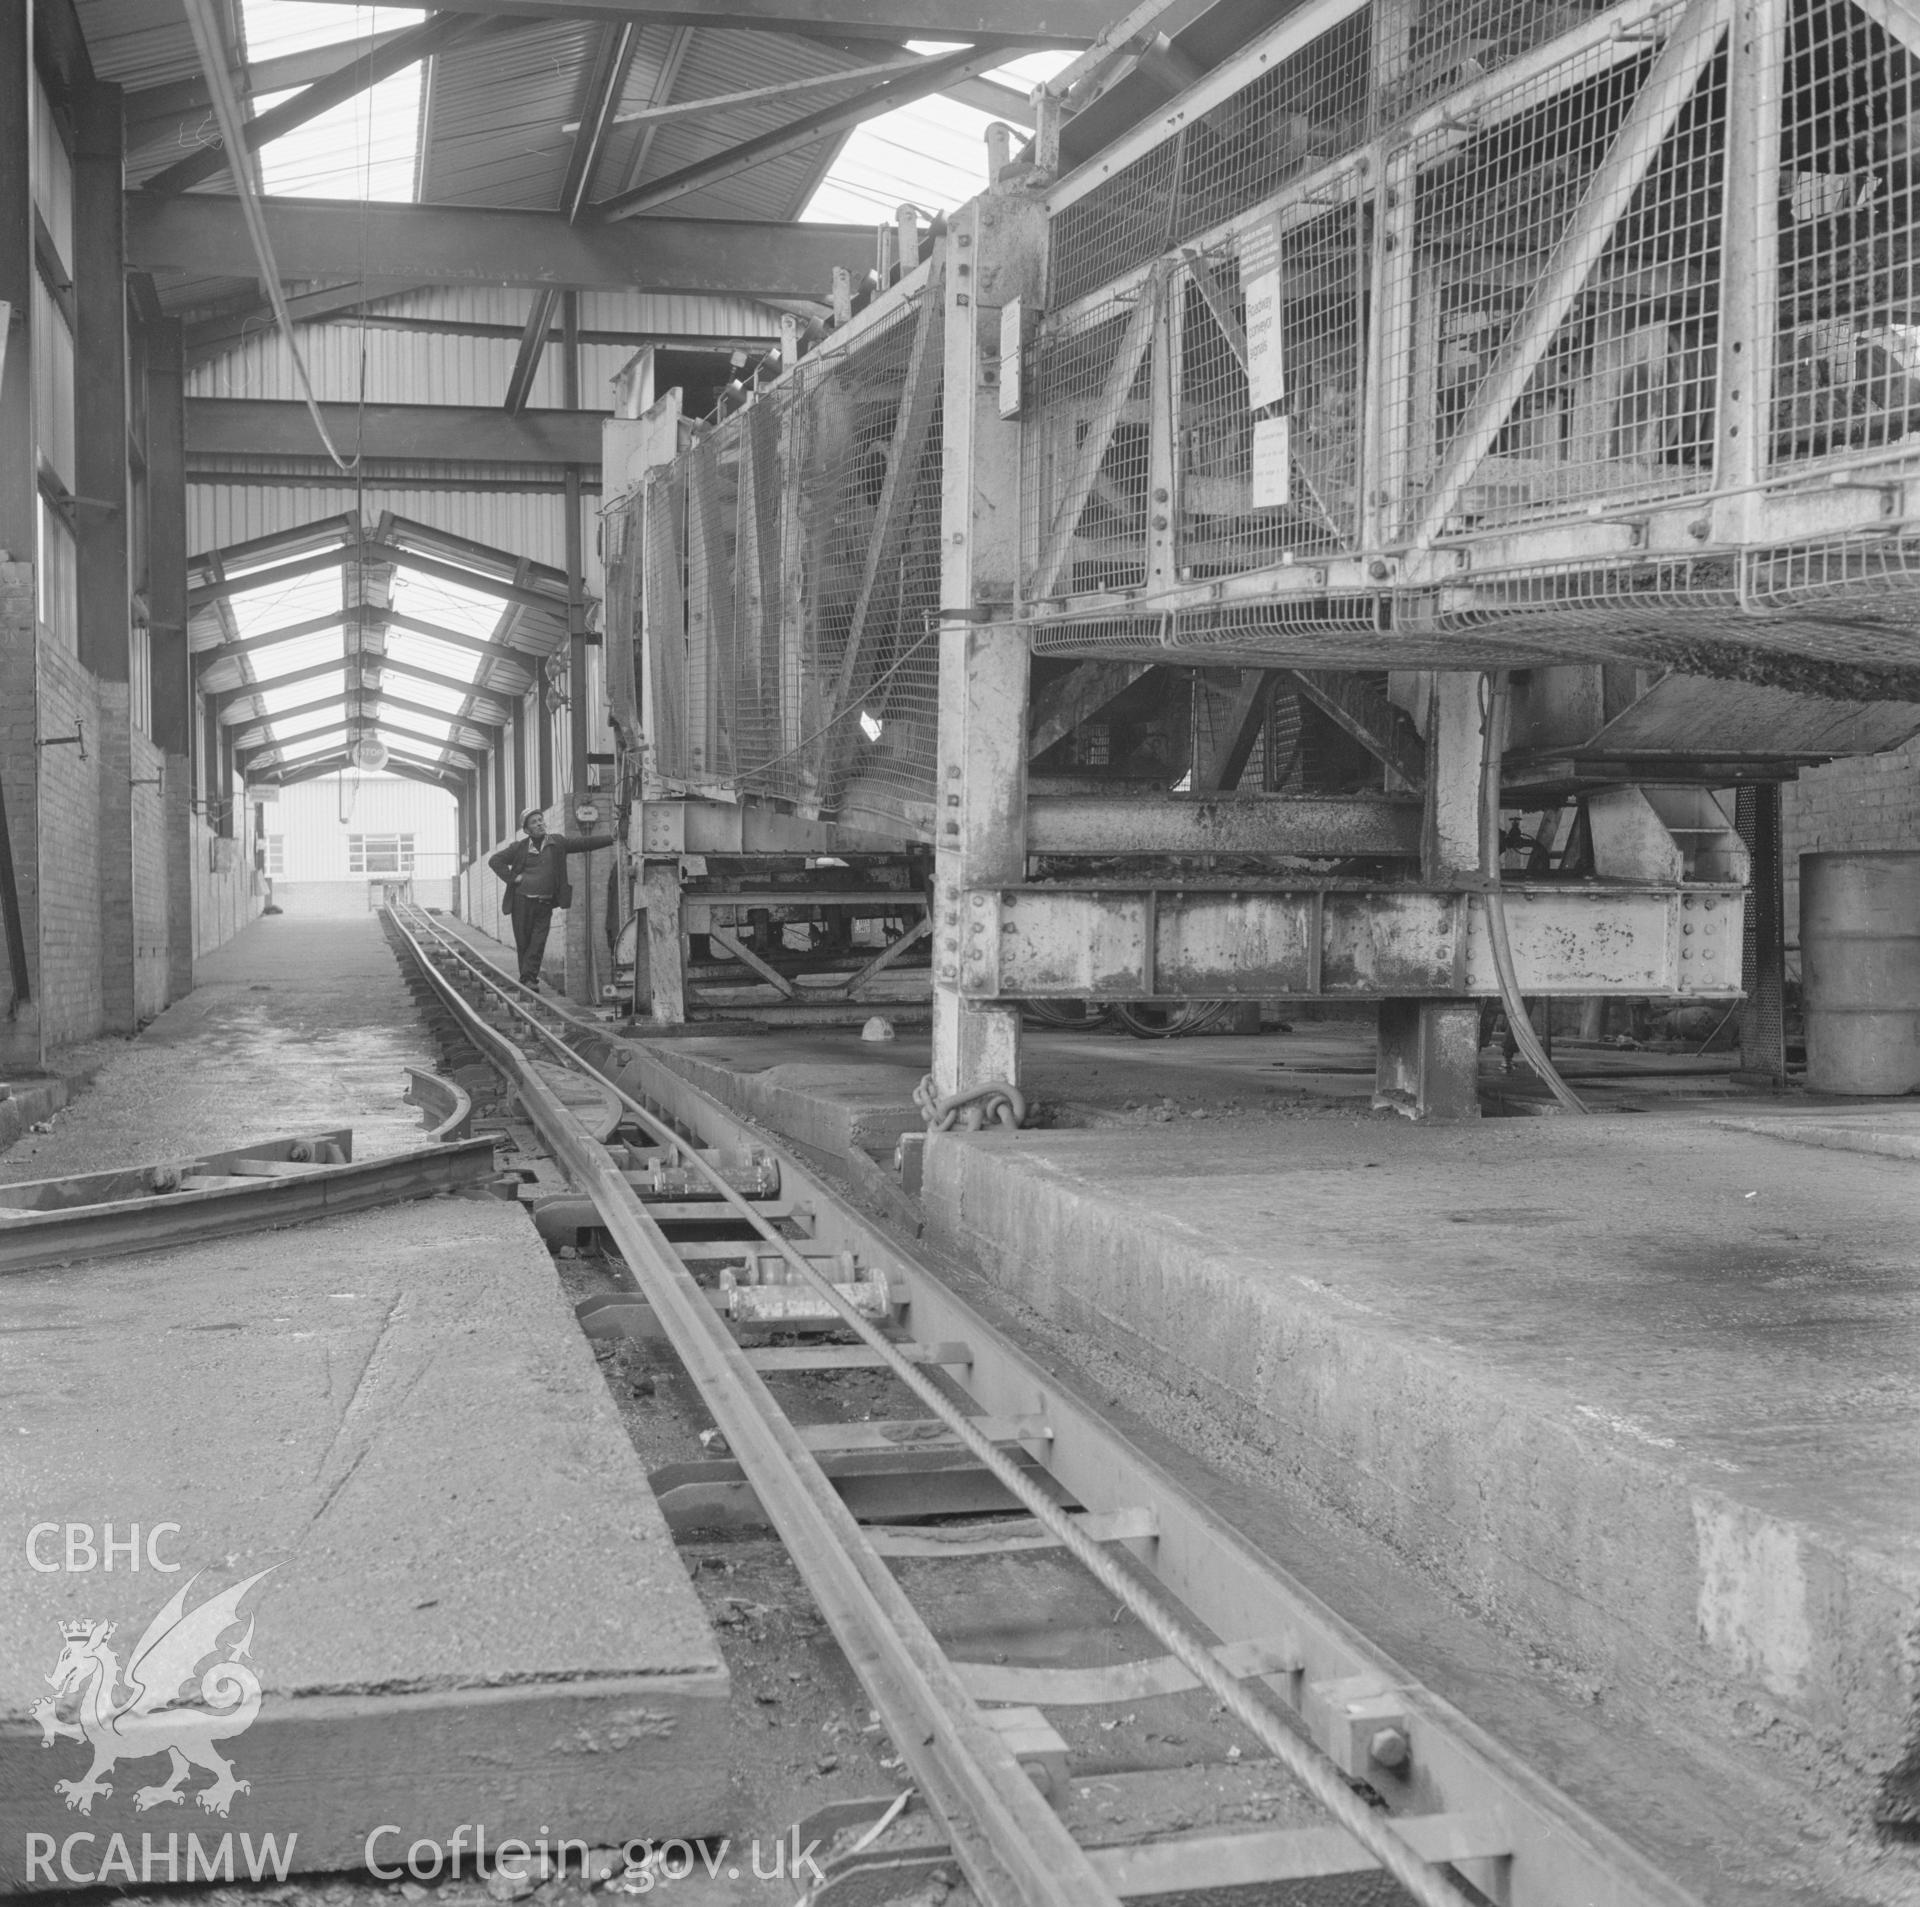 Digital copy of an acetate negative showing head of conveyor at Blaenant Colliery from the John Cornwell Collection.